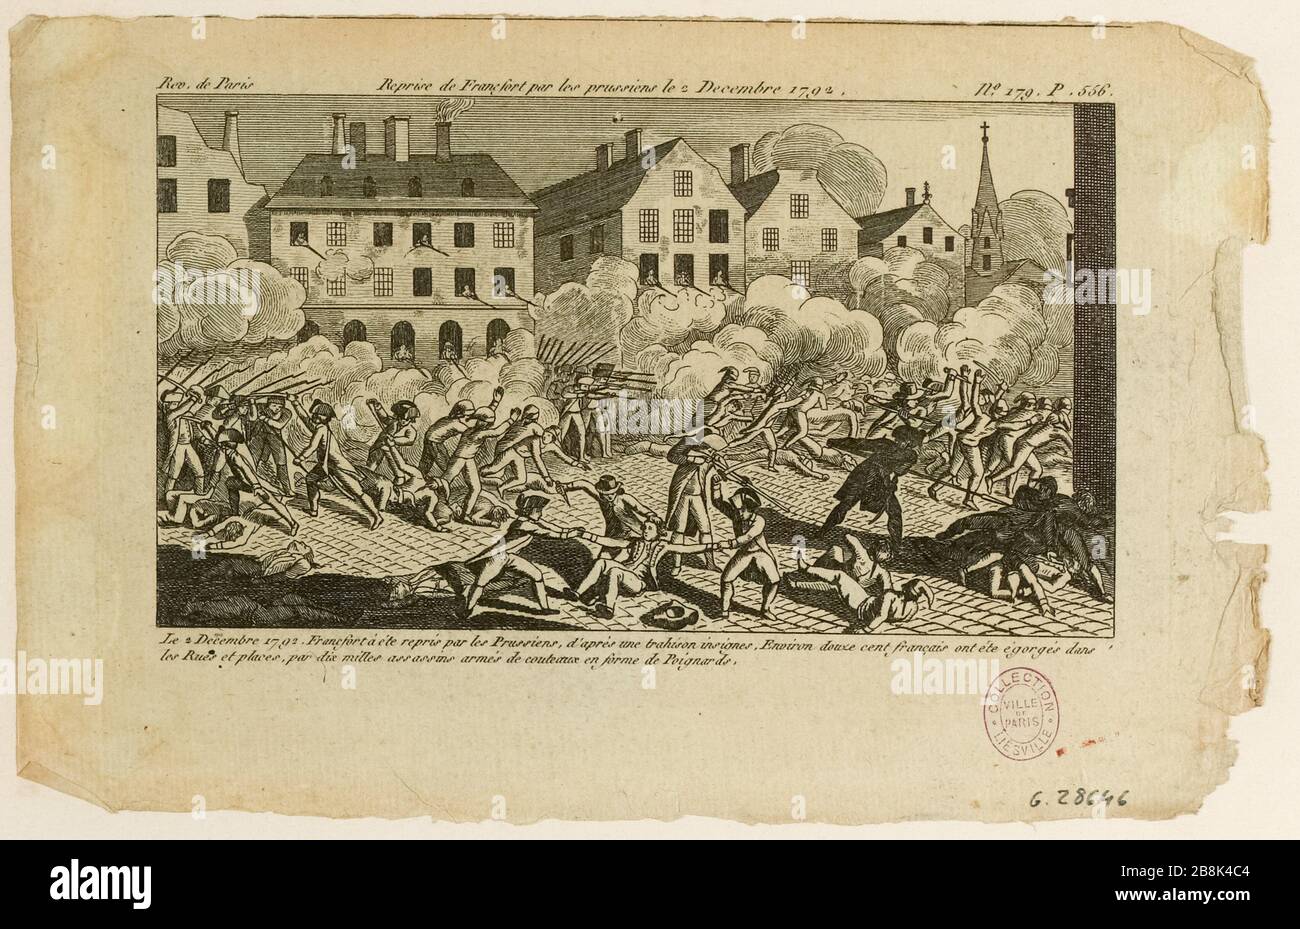 Resumption of the City of Frankfurt by the Prussians, Austrians and Hessians (Germany) and French massacre. November 28, 1792. Print Nº179, p.556 of the Journal of Paris Revolutions 8-15 December 1792. (dummy title) Stock Photo